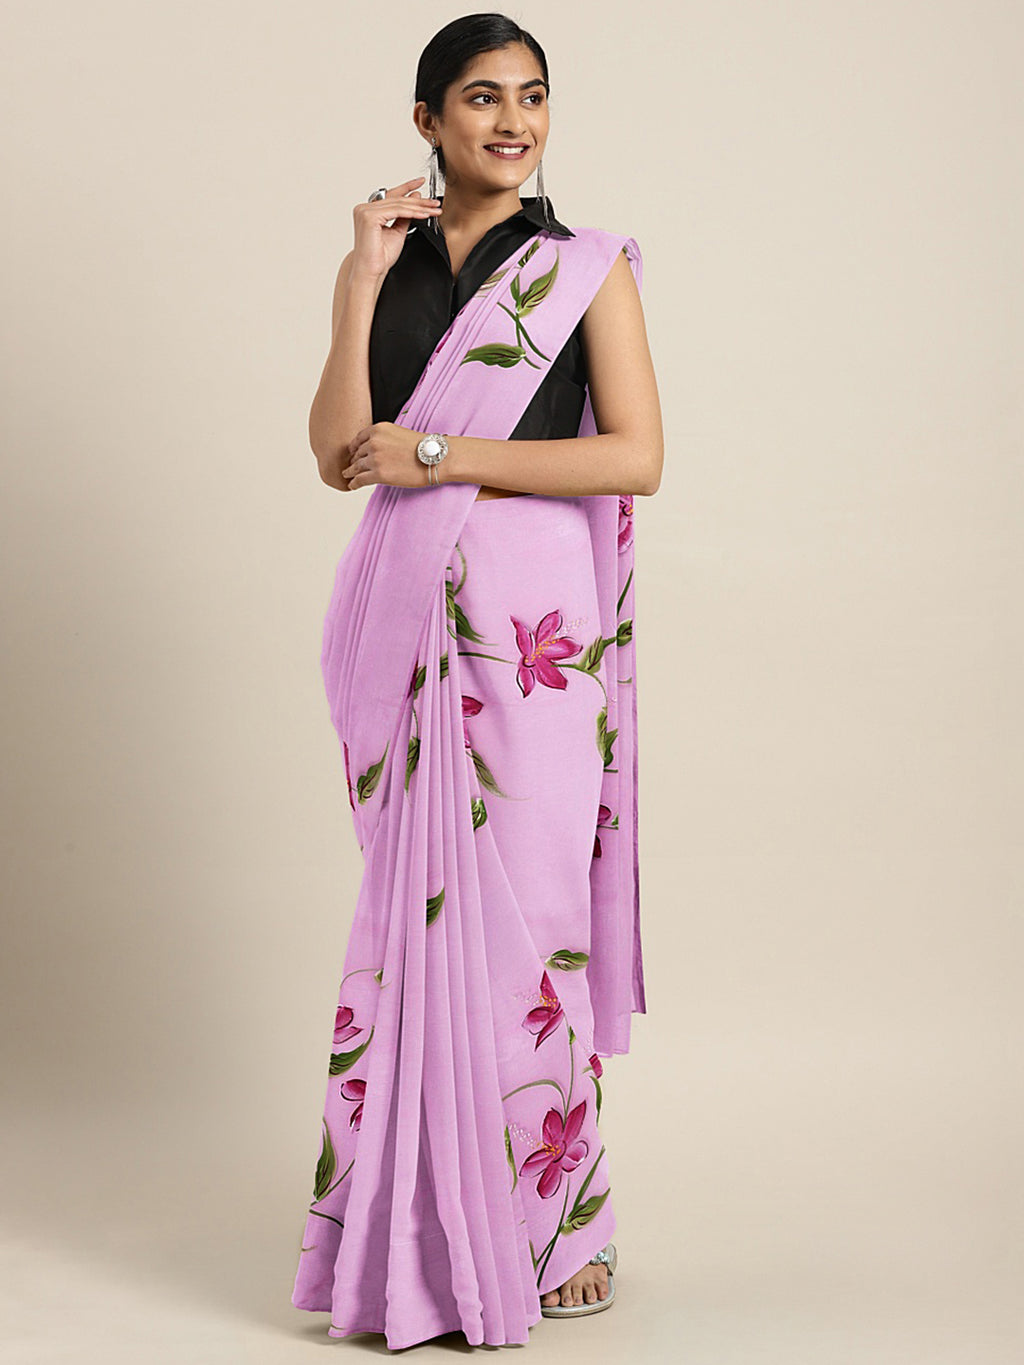 Kalakari India Organza Hand Painted Saree With Blouse BHKPSA0173-Saree-Kalakari India-BHKPSA0173-Bollywood, Fashion, Geographical Indication, Hand Crafted, Heritage Prints, Natural Dyes, Organza, Sarees, Sustainable Fabrics, Woven-[Linen,Ethnic,wear,Fashionista,Handloom,Handicraft,Indigo,blockprint,block,print,Cotton,Chanderi,Blue, latest,classy,party,bollywood,trendy,summer,style,traditional,formal,elegant,unique,style,hand,block,print, dabu,booti,gift,present,glamorous,affordable,collectible,S